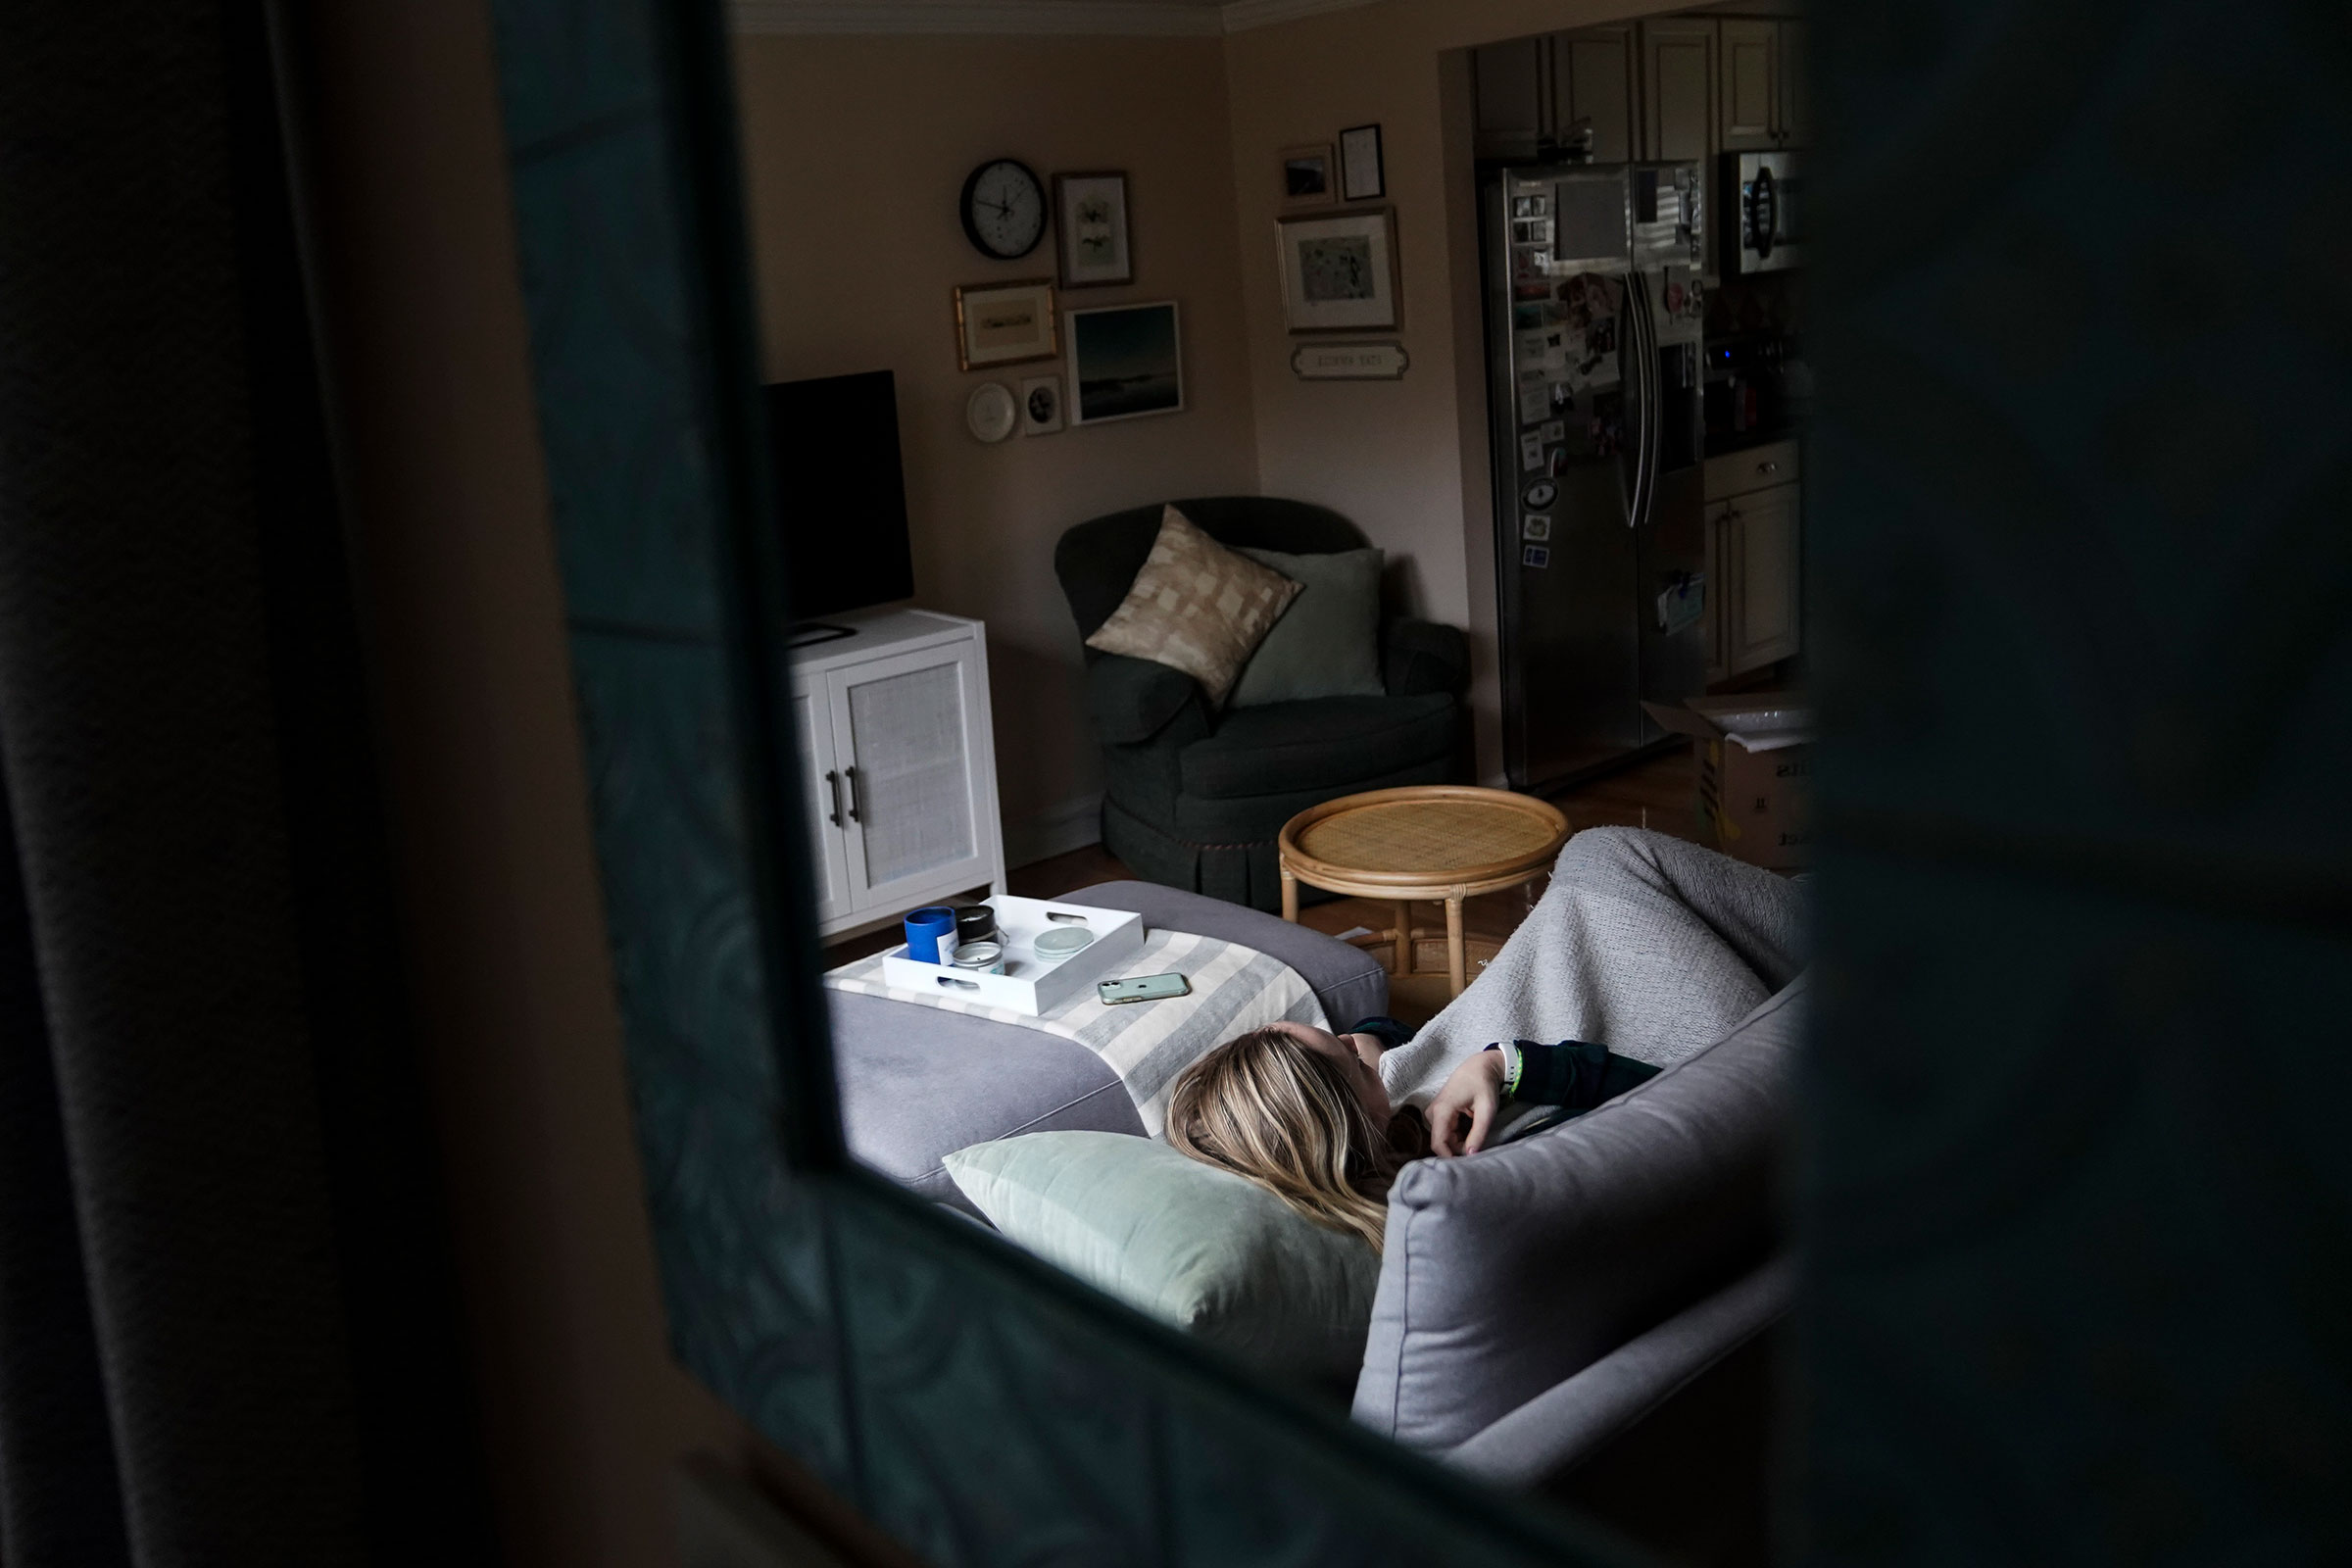 Eve Efron, who has been struggling with Long COVID for nearly a year, frequently has to rest on the couch in her home in Fairfax, VA on Feb. 3, 2022. (Carolyn Van Houten—The Washington Post/Getty Images)